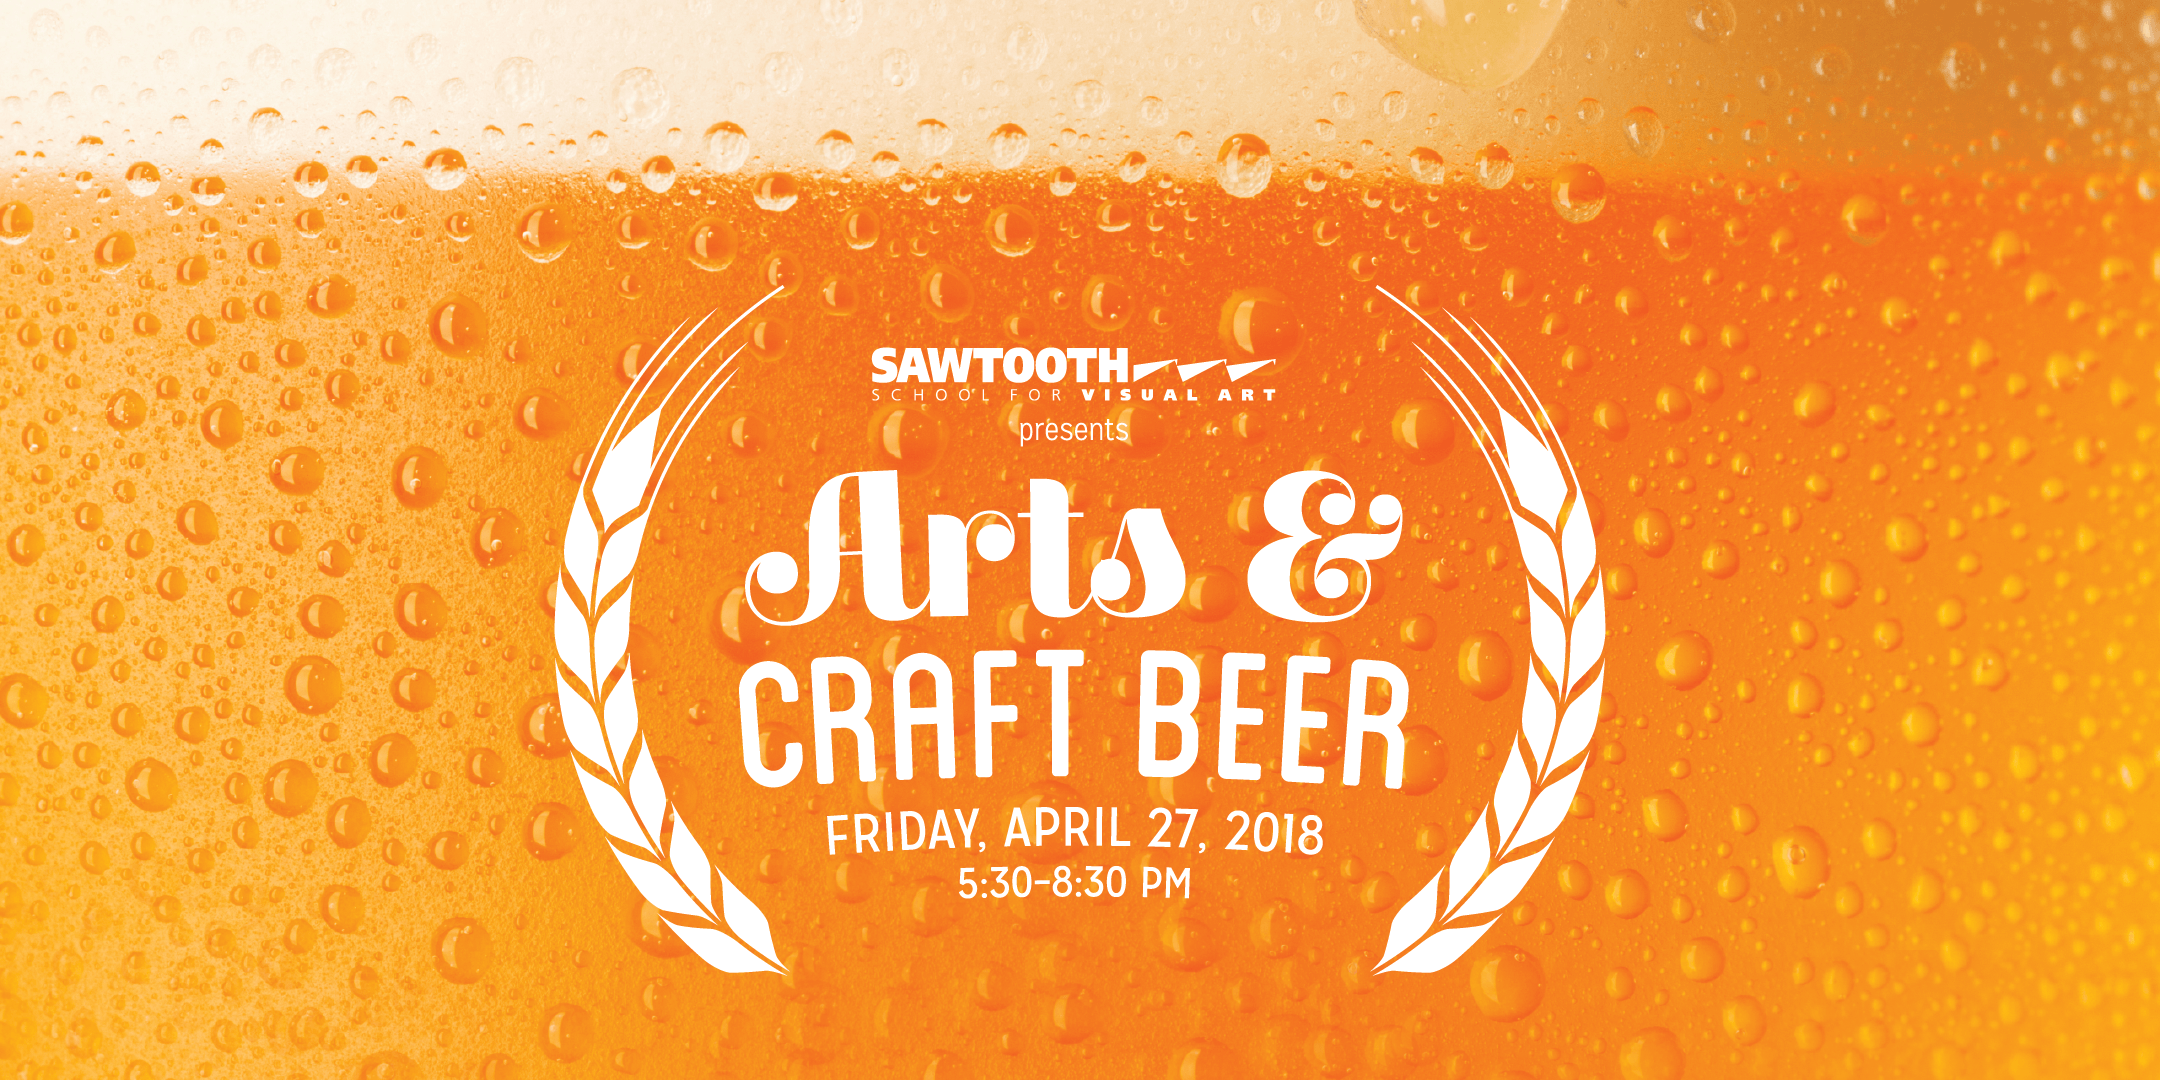 Sawtooth School Logo - Get your tickets for Arts & Craft Beer!. Sawtooth School for Visual Art